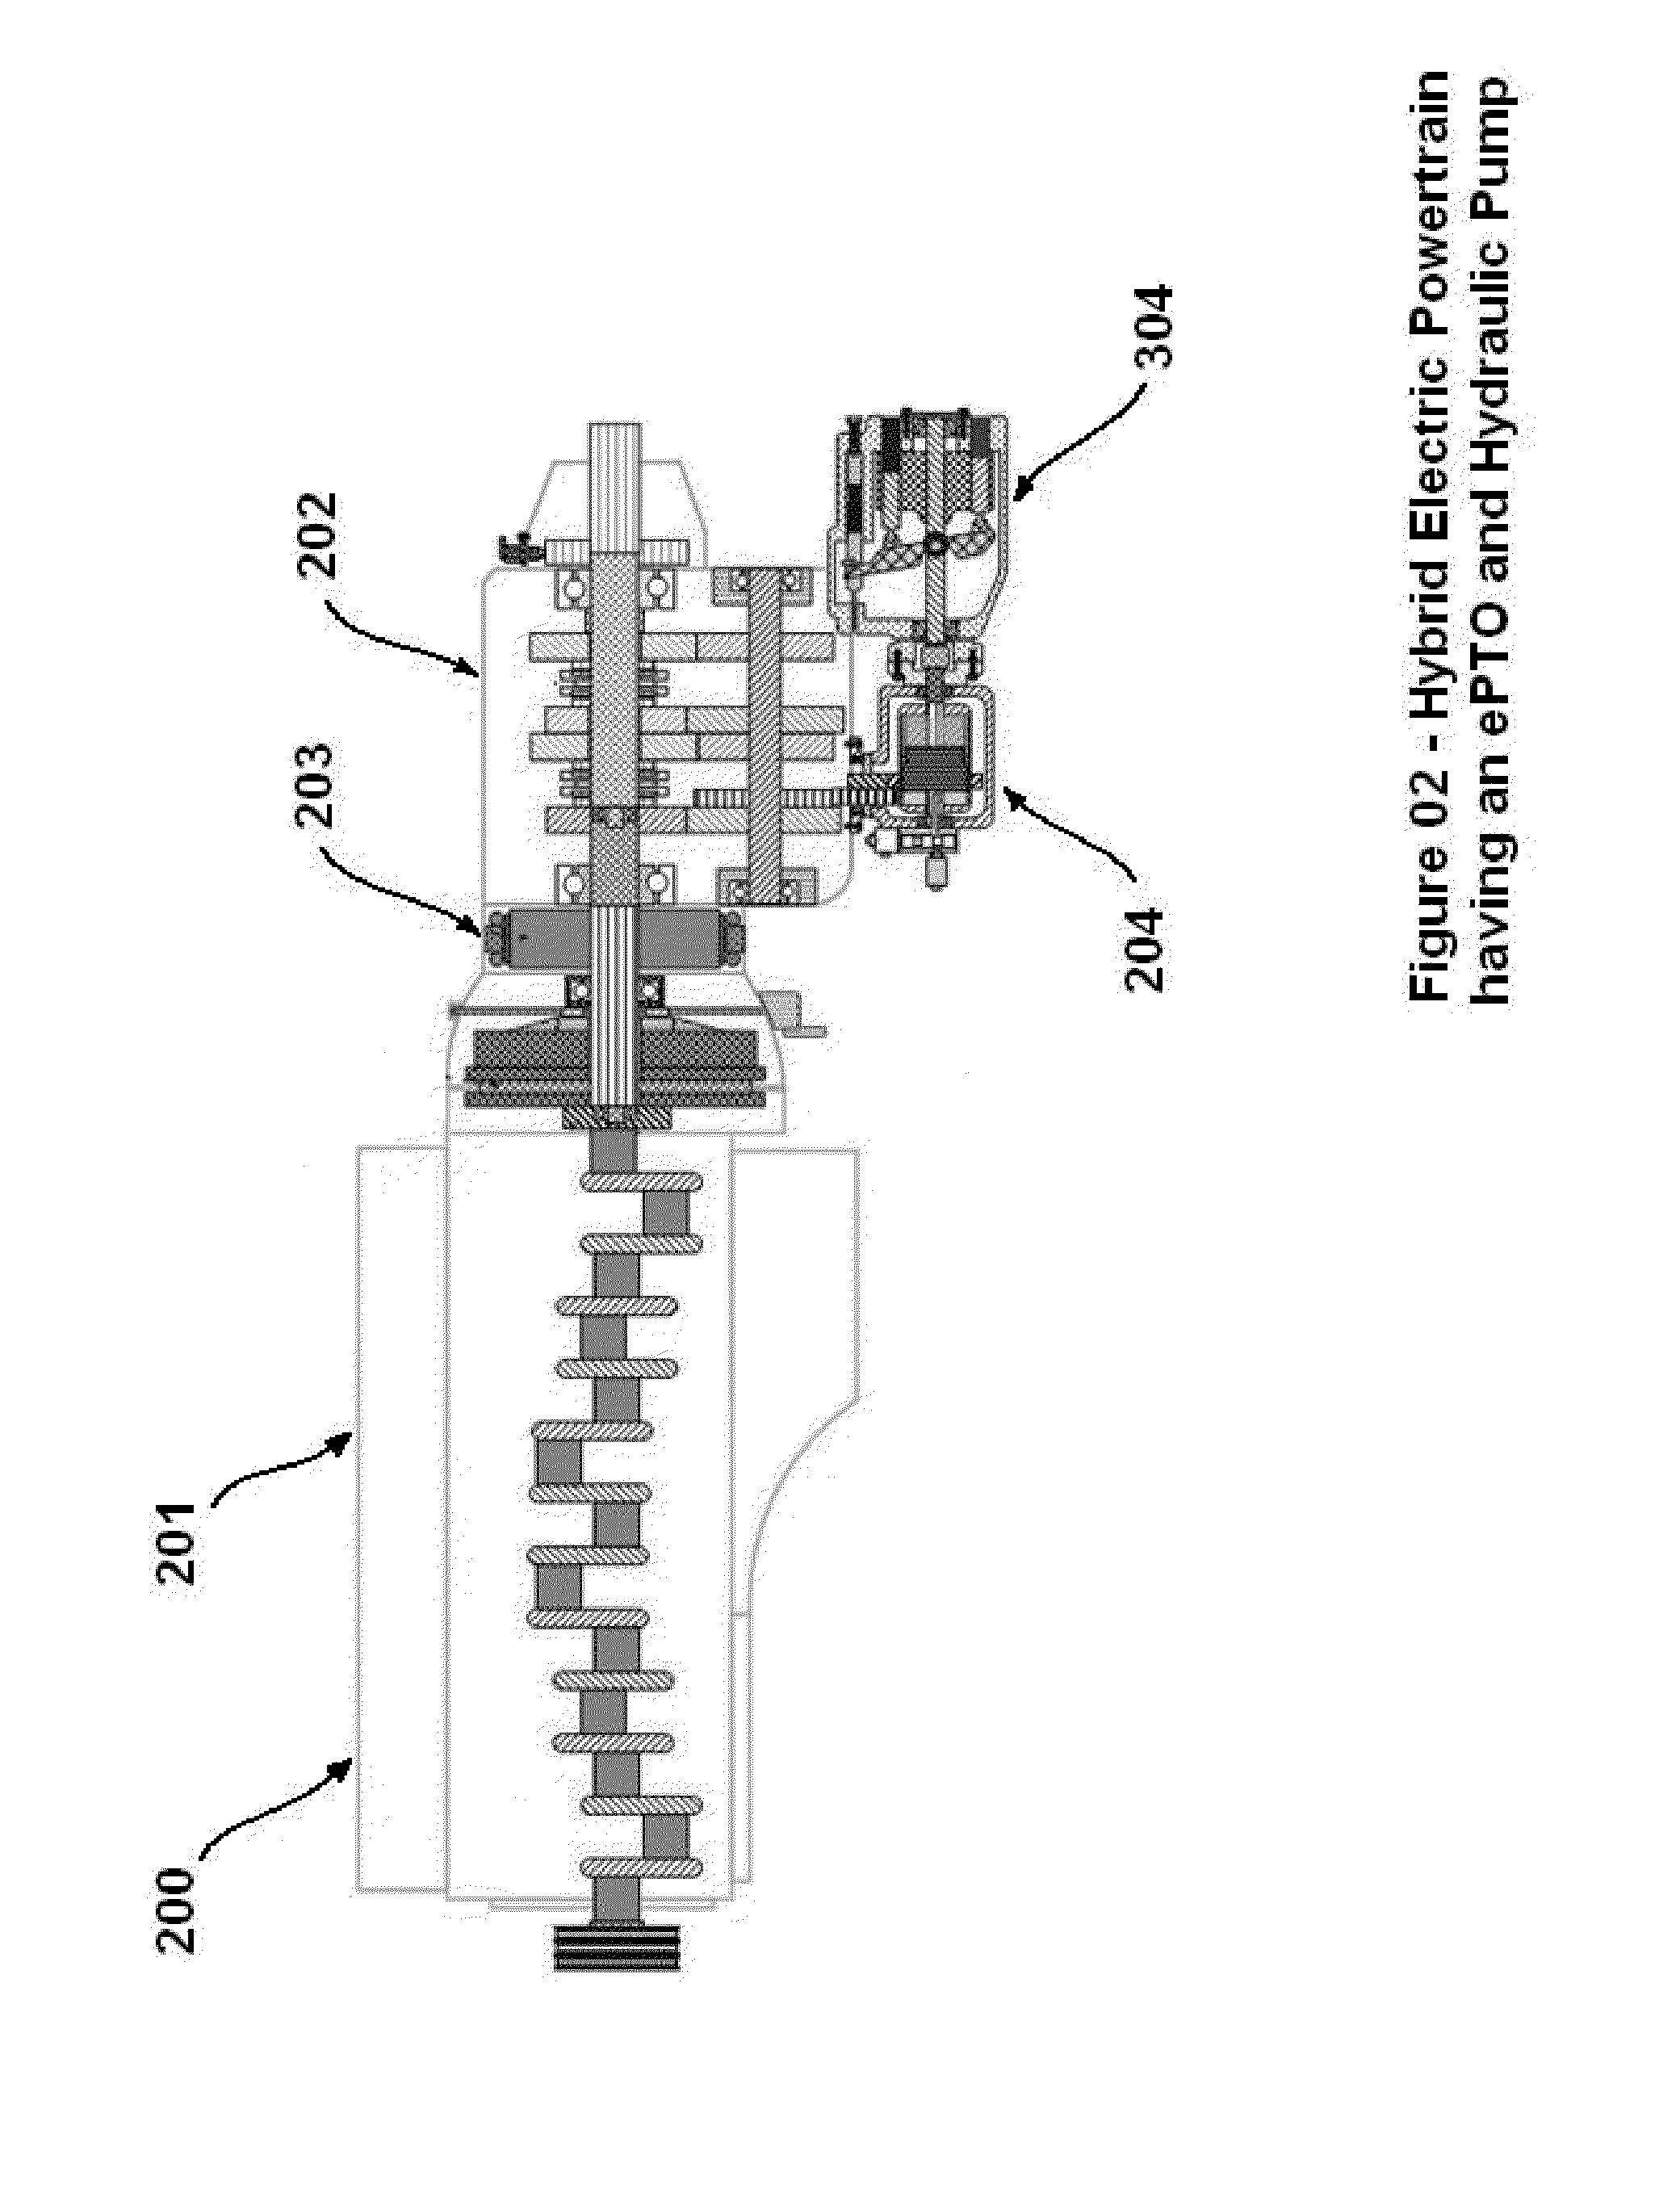 Hybrid Electric Vehicle Traction Motor Driven Power Take-Off Control System